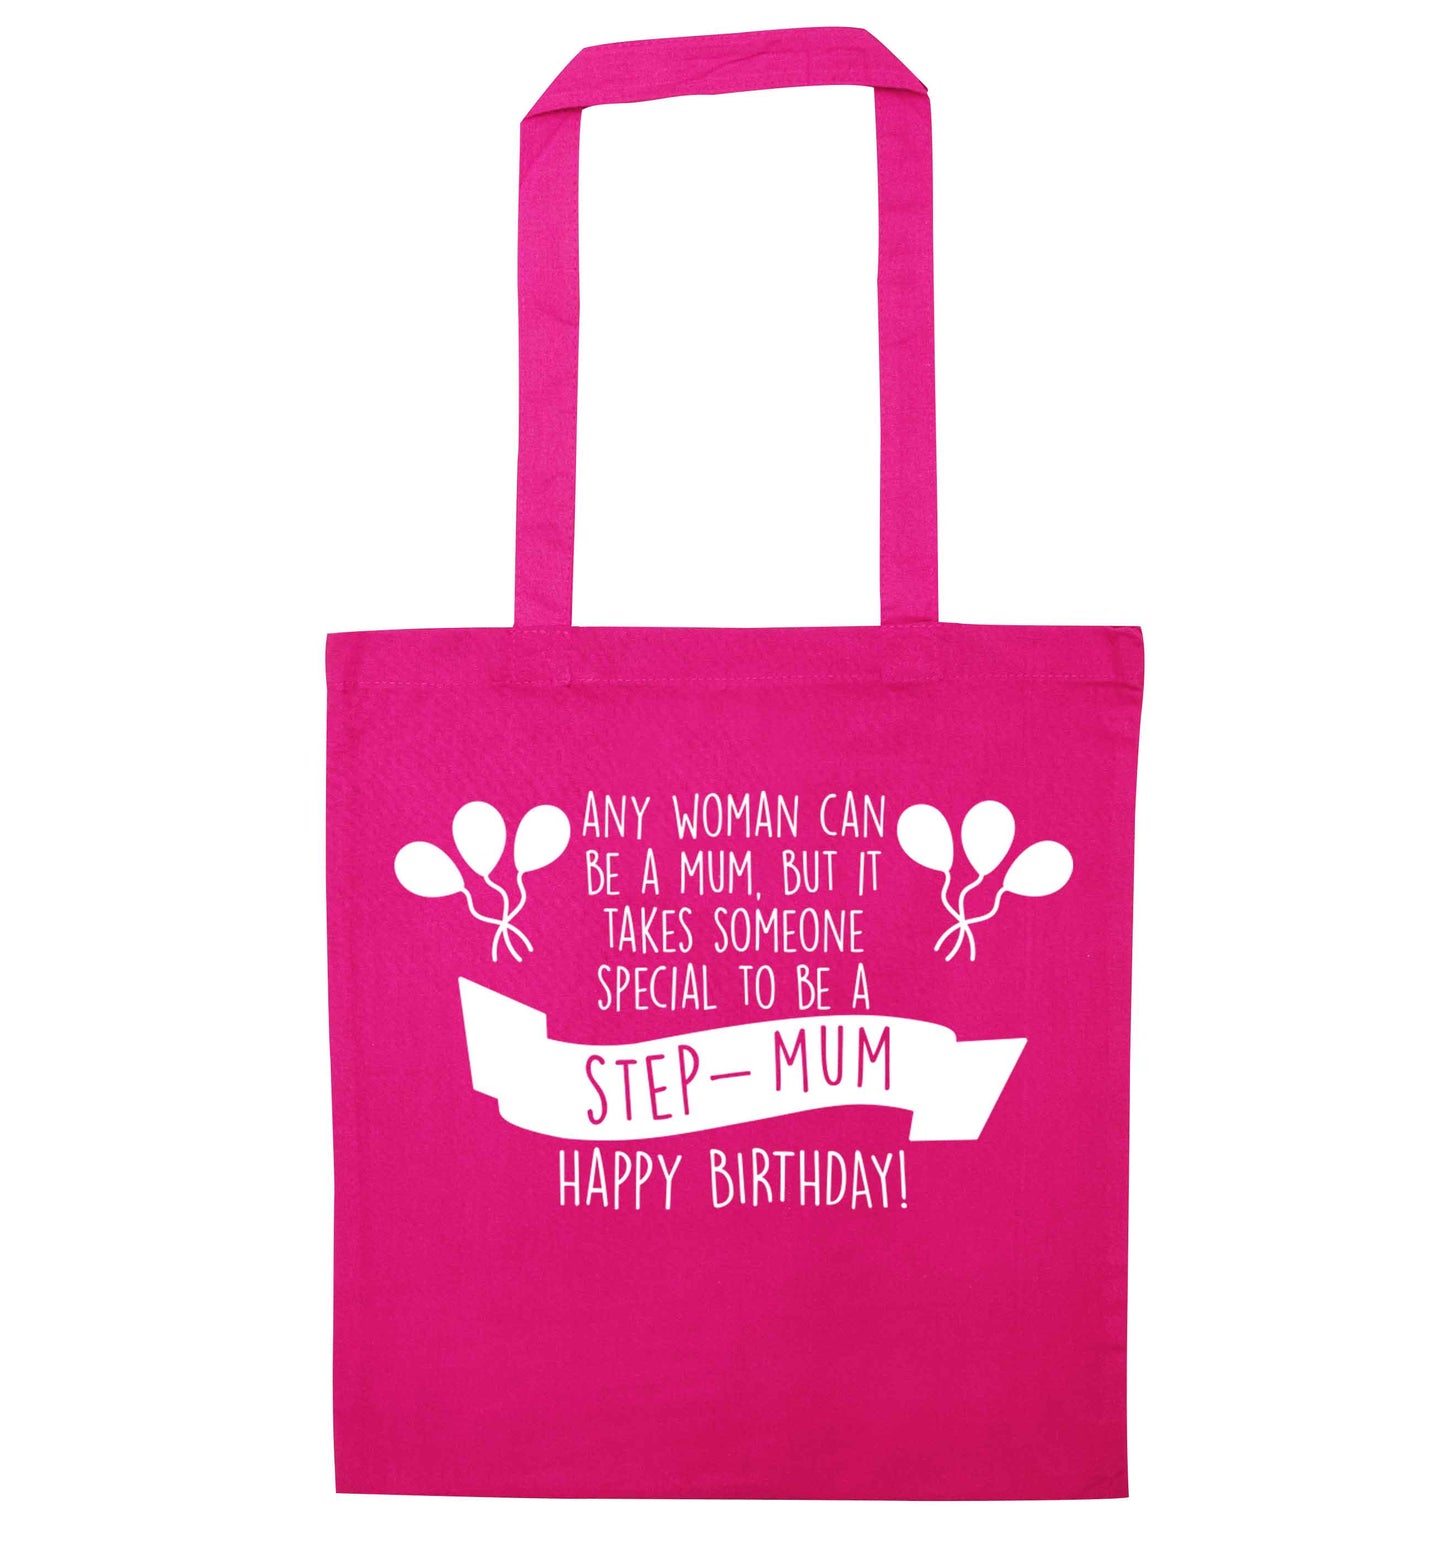 Takes someone special to be a step-mum, happy birthday! pink tote bag